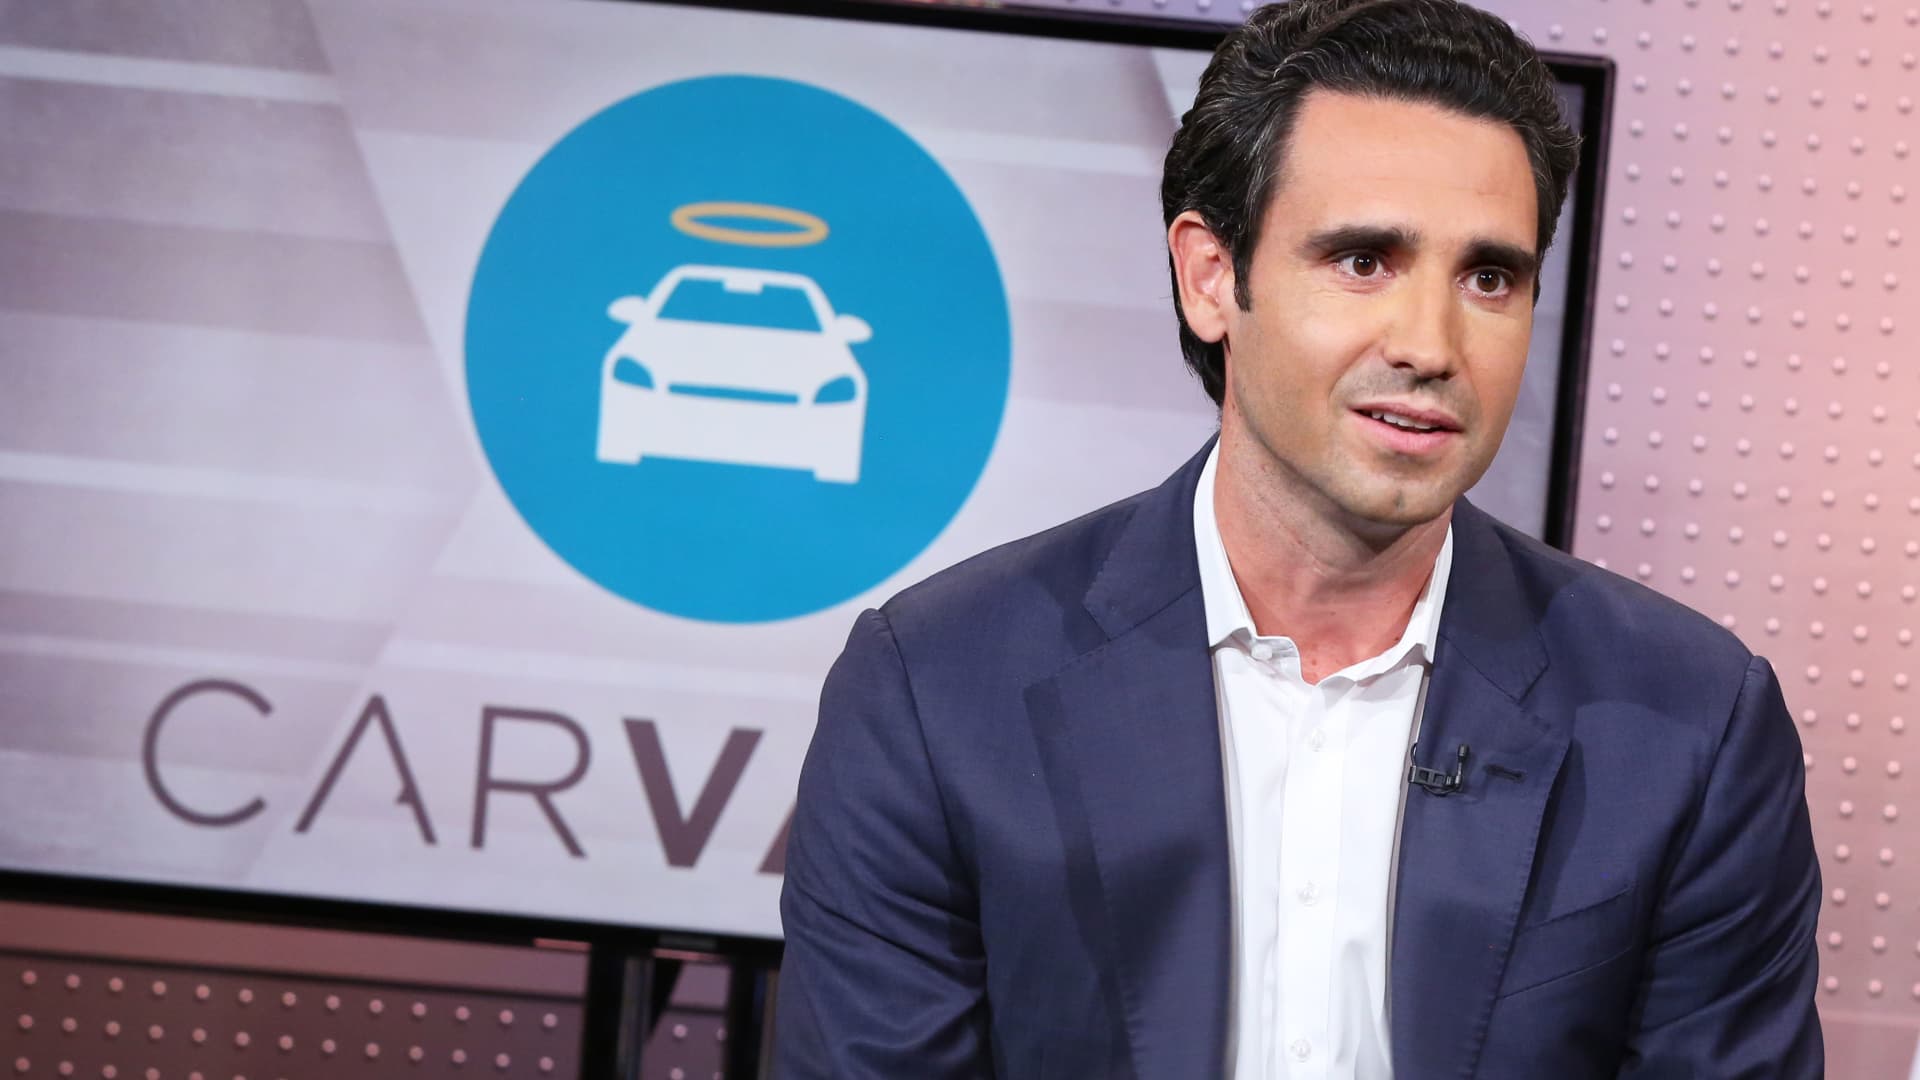 How Carvana went from a Wall Street top pick to meme stock trading